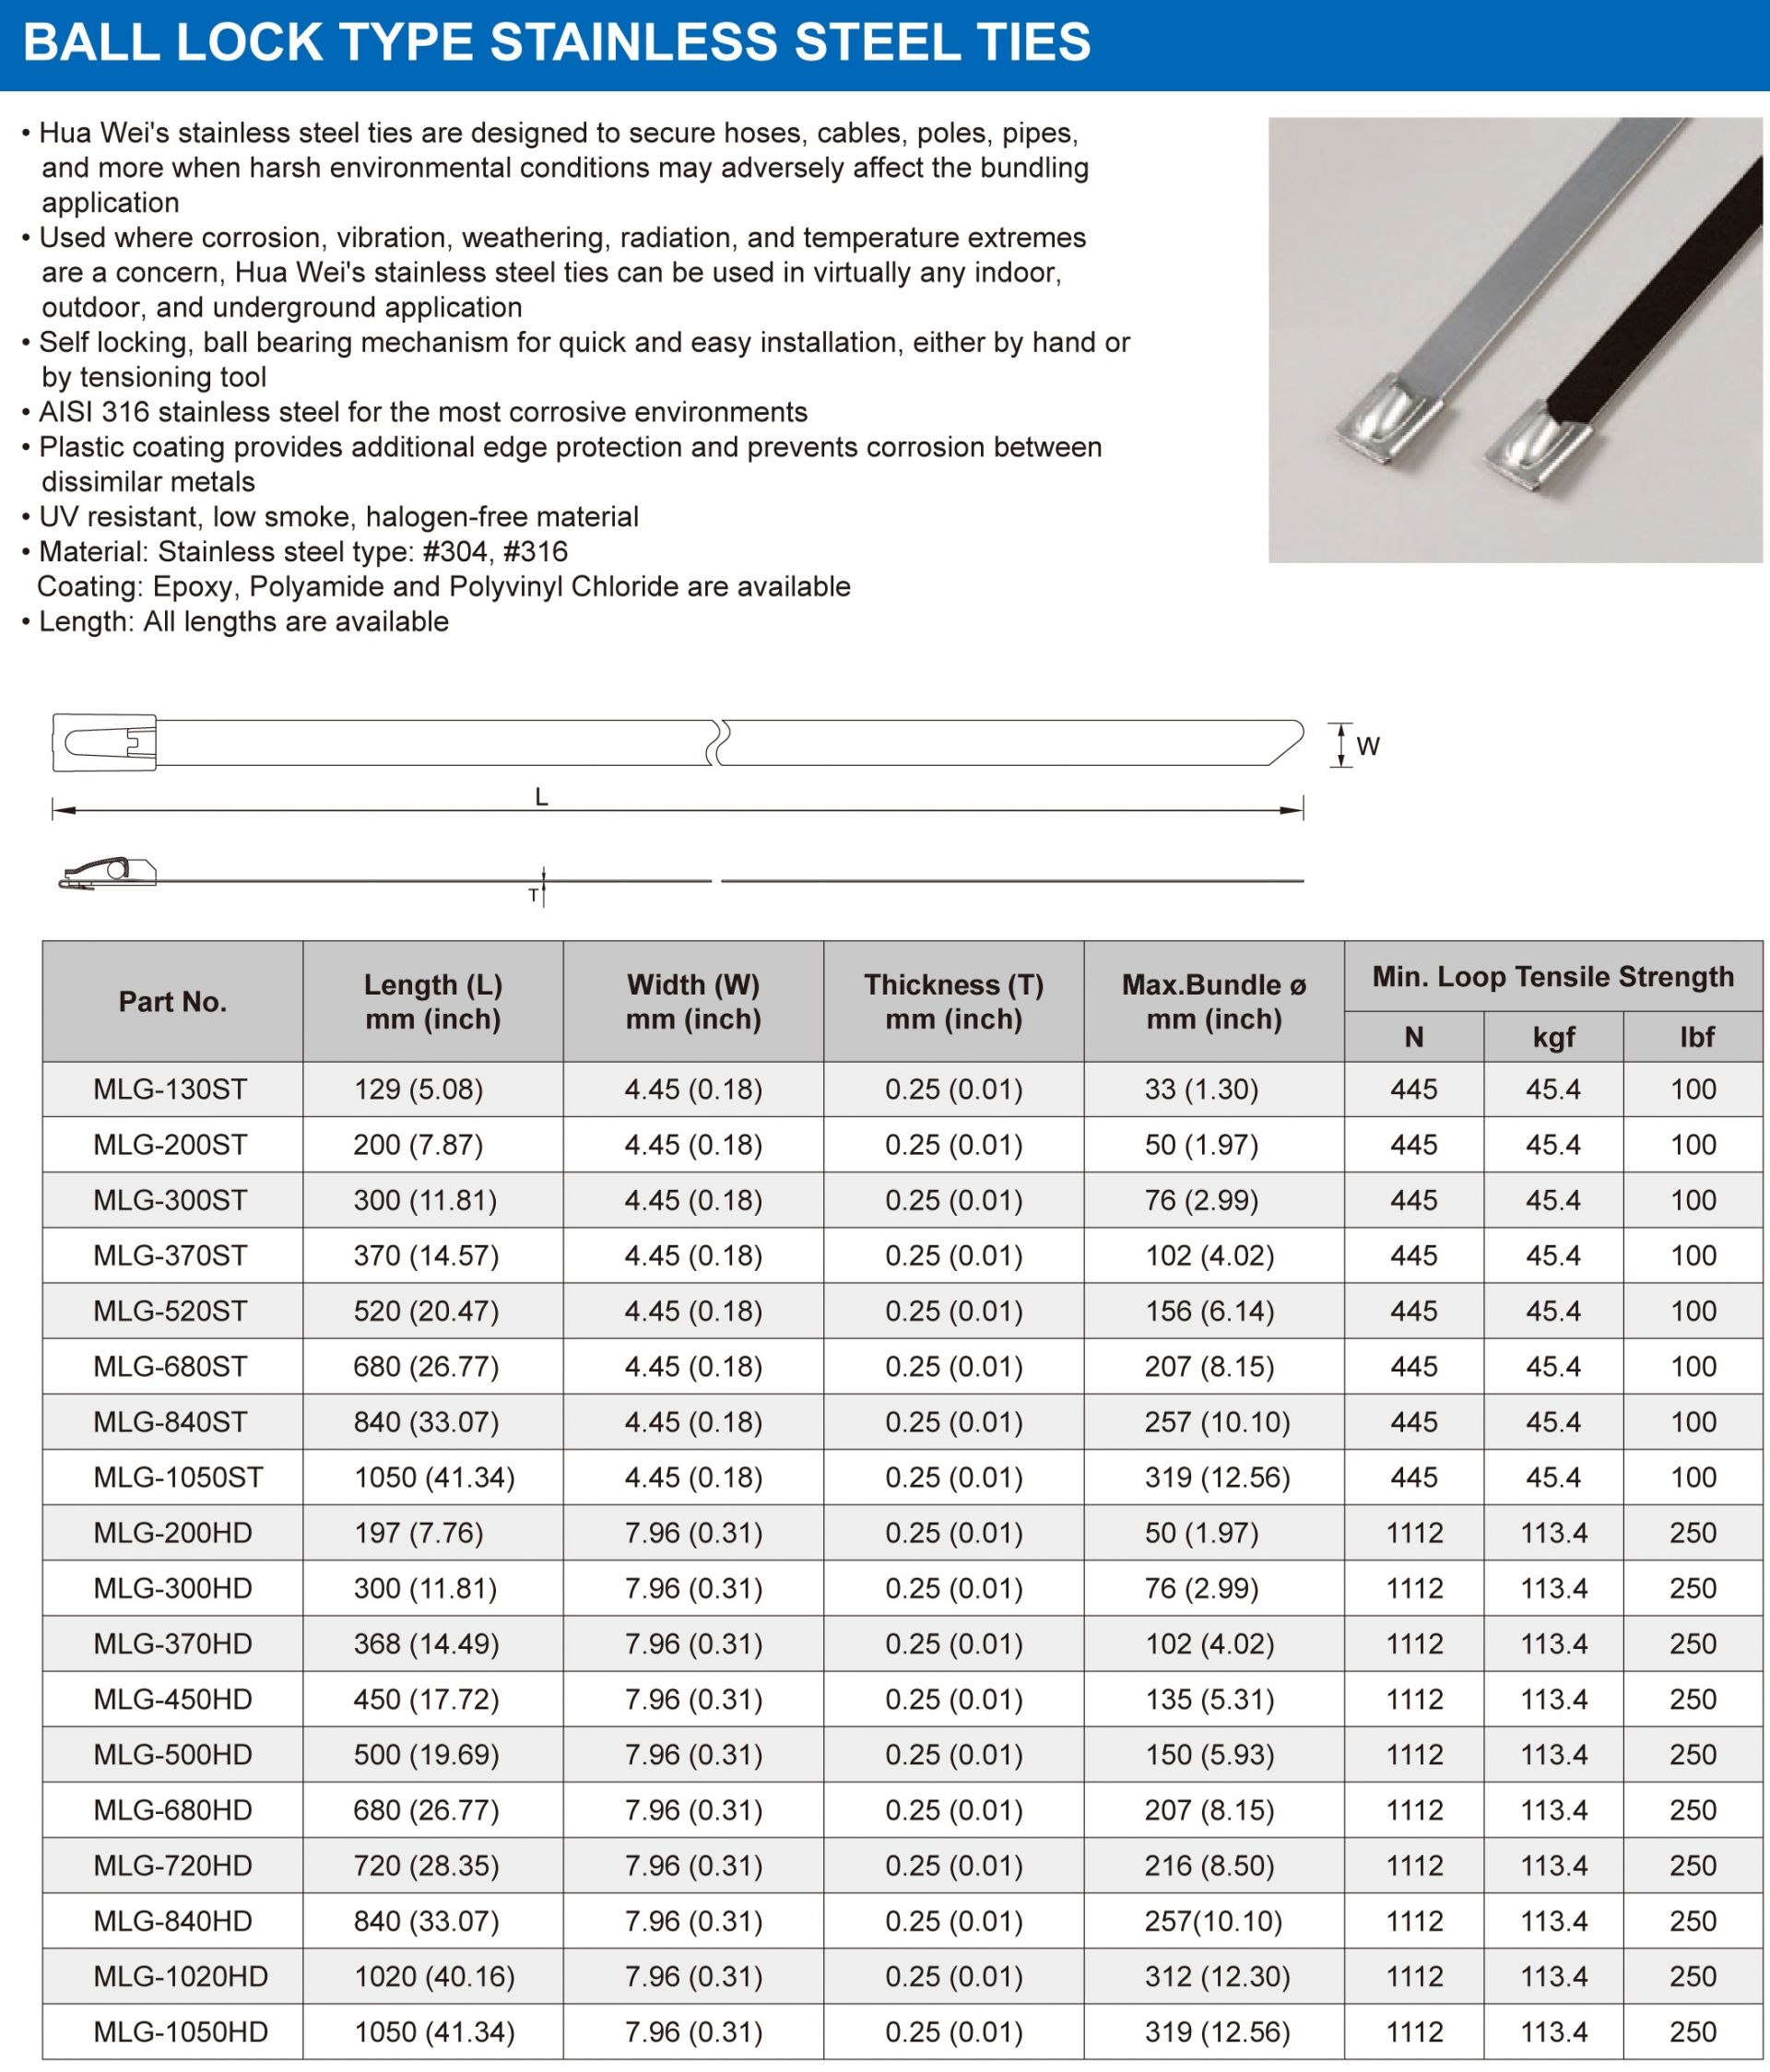 Specification – Ball Lock Type Stainless Steel Ties